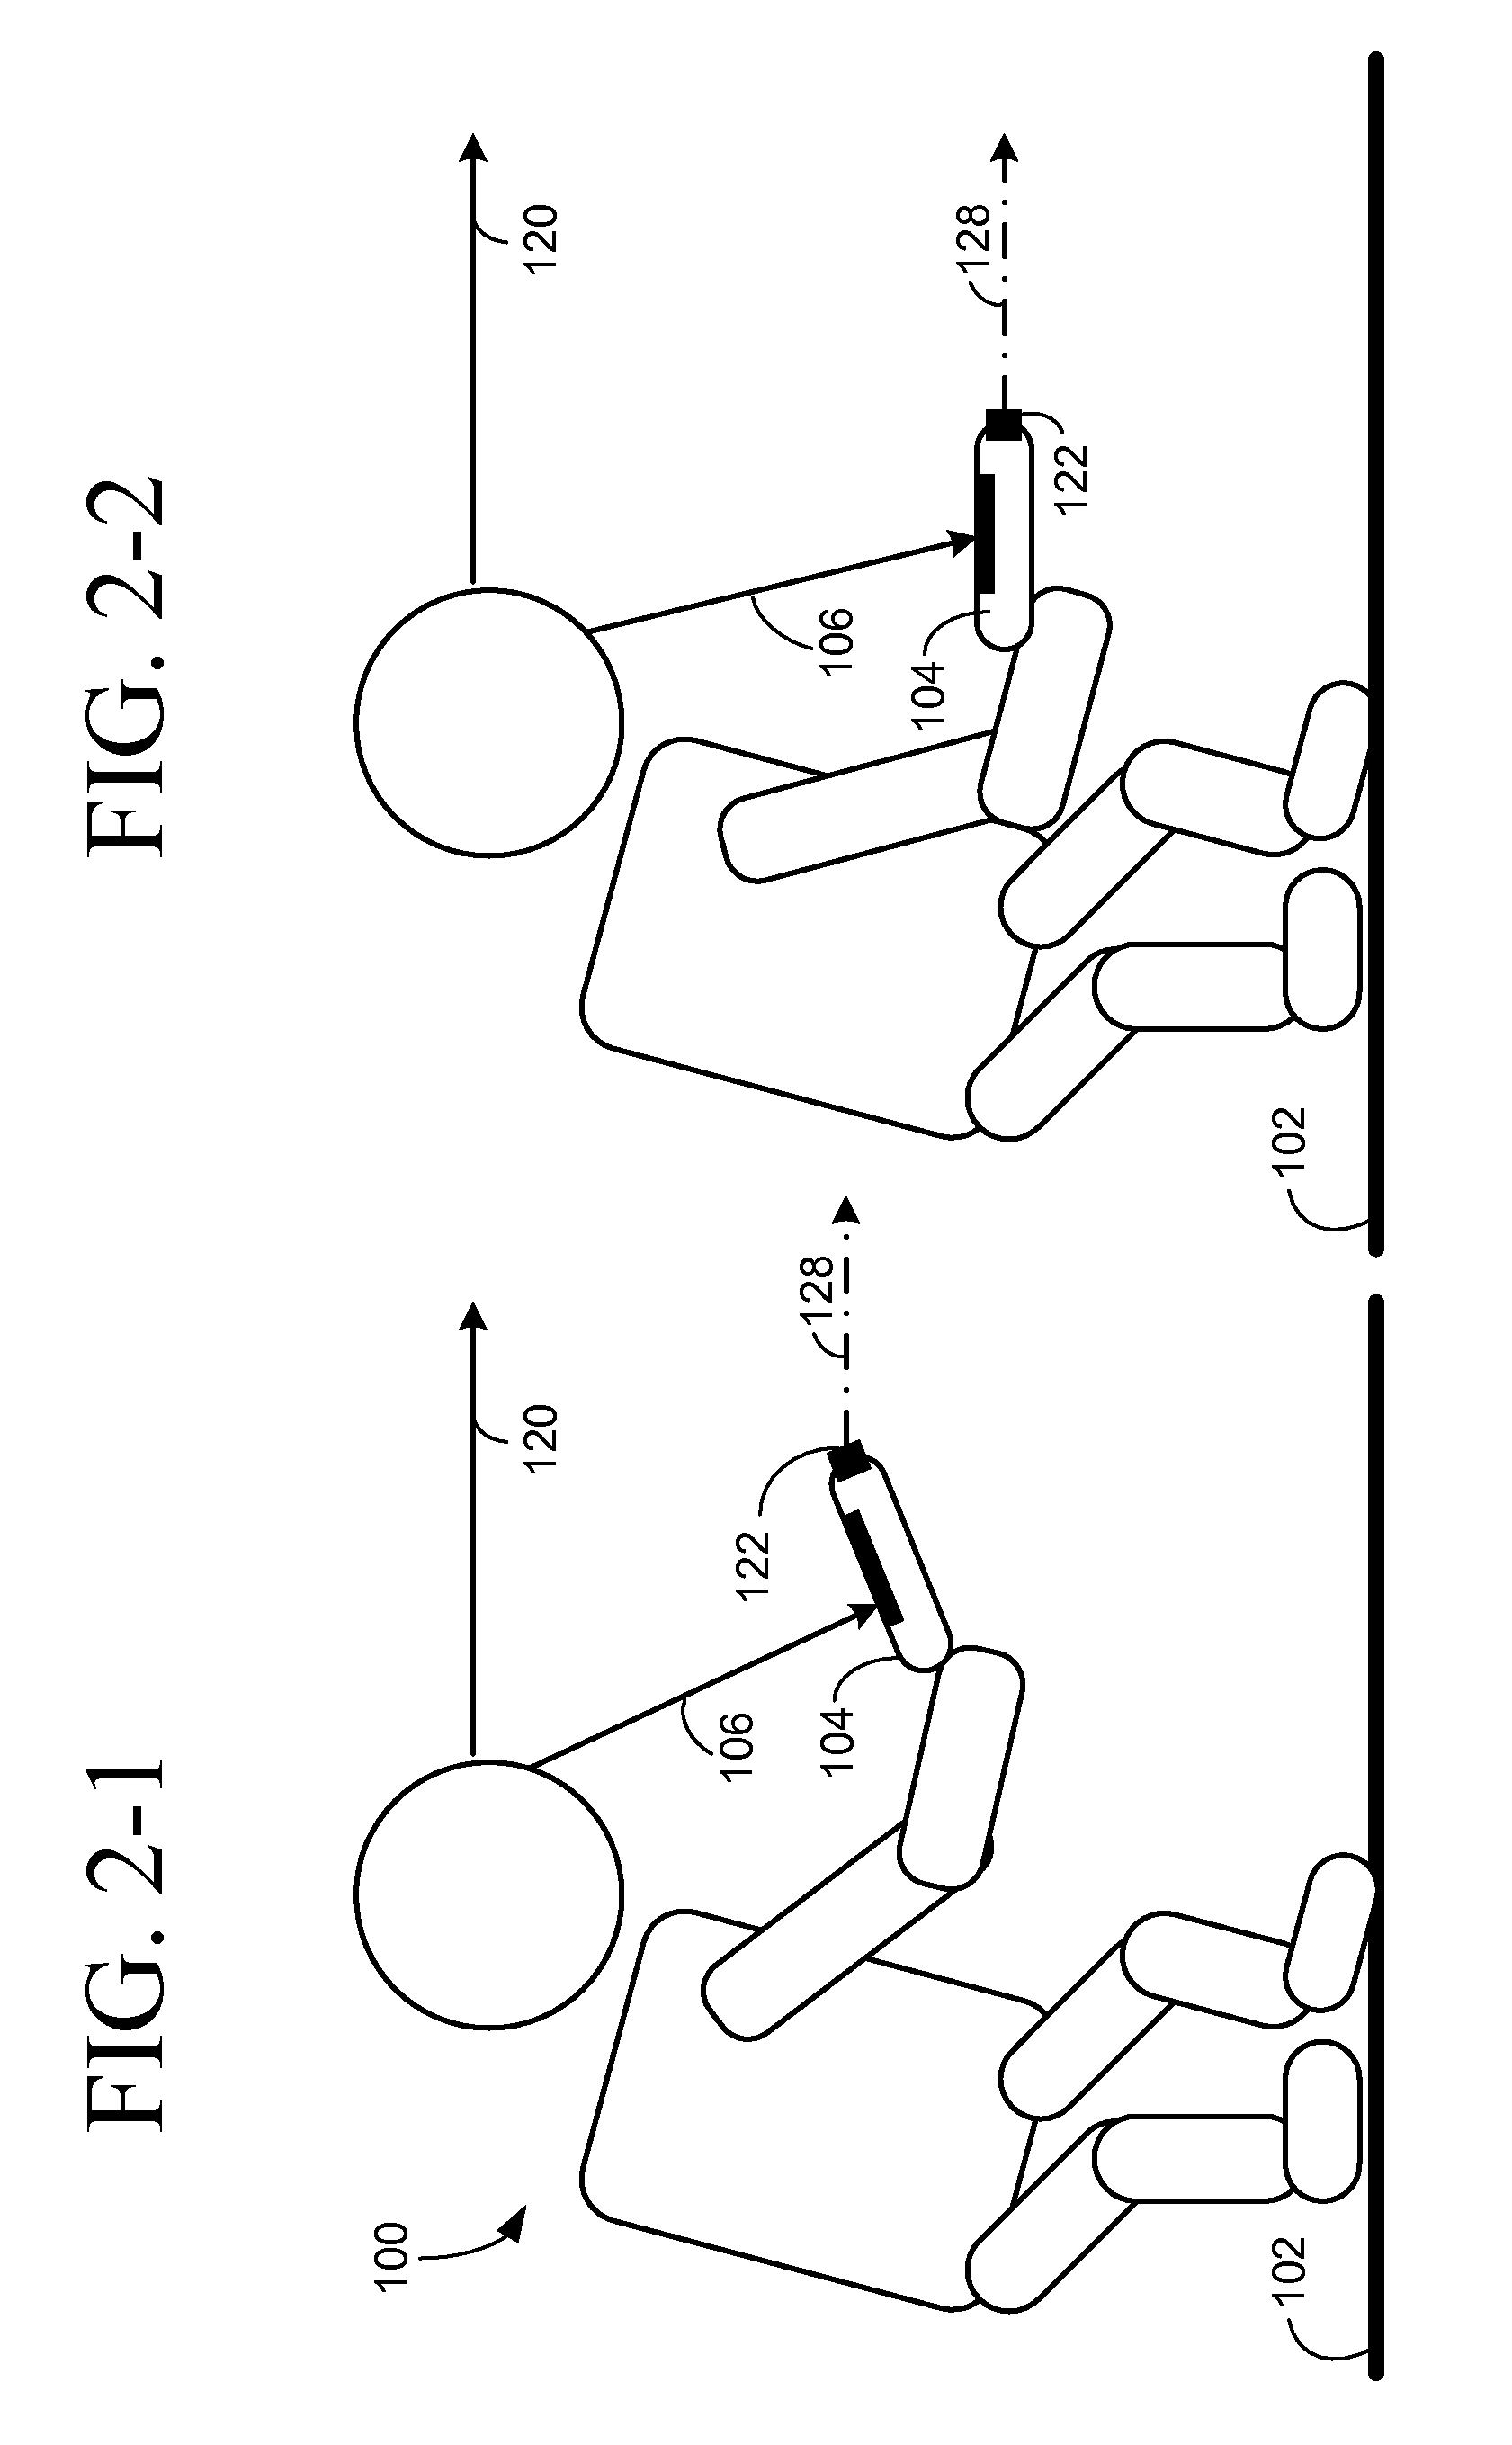 Controllably Rotatable Camera in Handheld Electronic Device